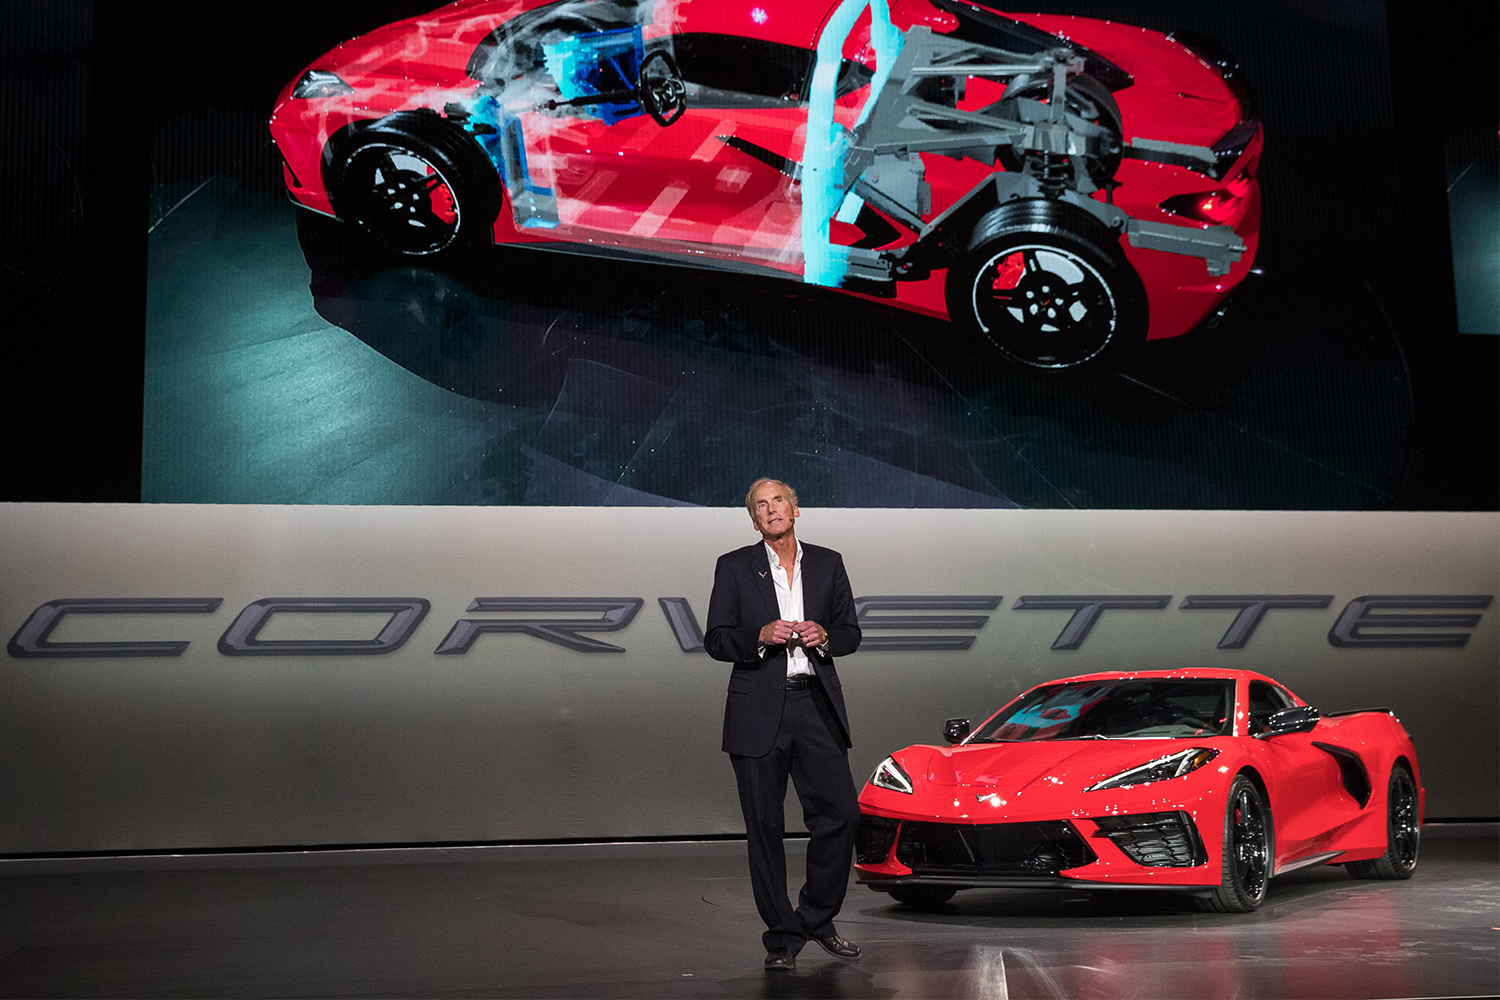 Executive Chief Engineer Tadge Juechter introduces the 2020 Chevrolet Corvette Stingray in July 2019